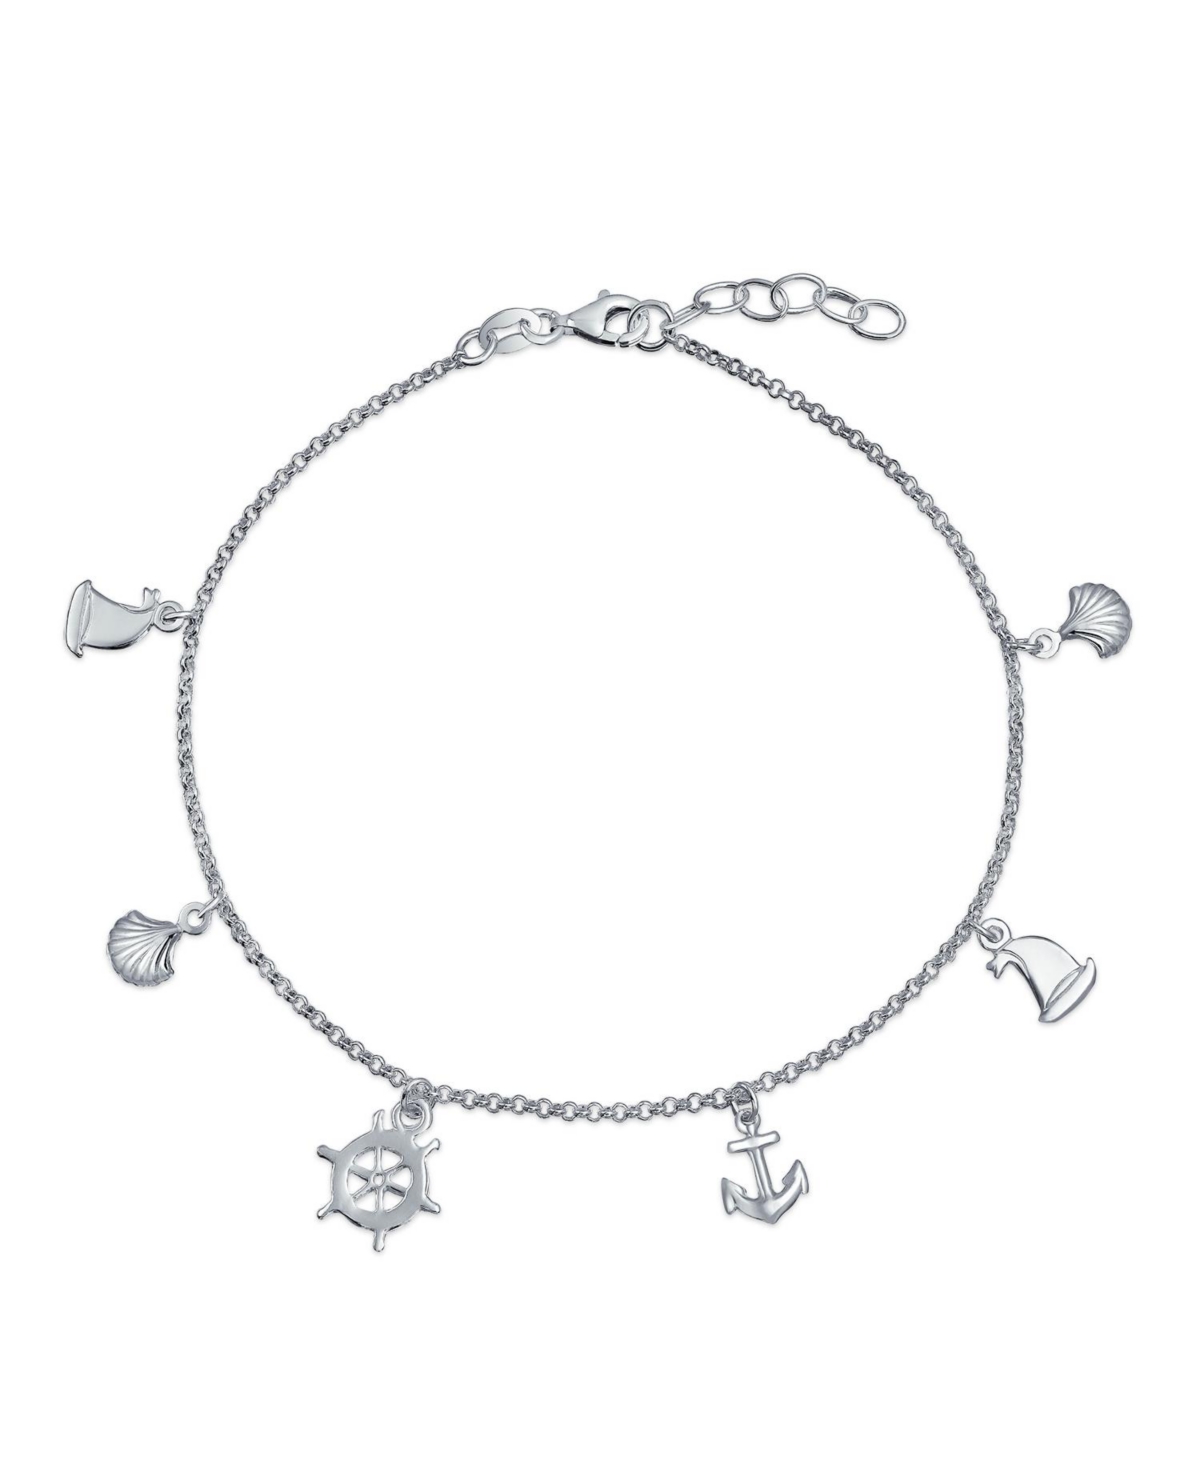 Nautical Multi Charm Dangle Anchor Sailboat Ship Wheel Sea Shell Anklet Ankle Bracelet For Women.925 Sterling Silver Adjustable 9 To 10 Inch With Exte